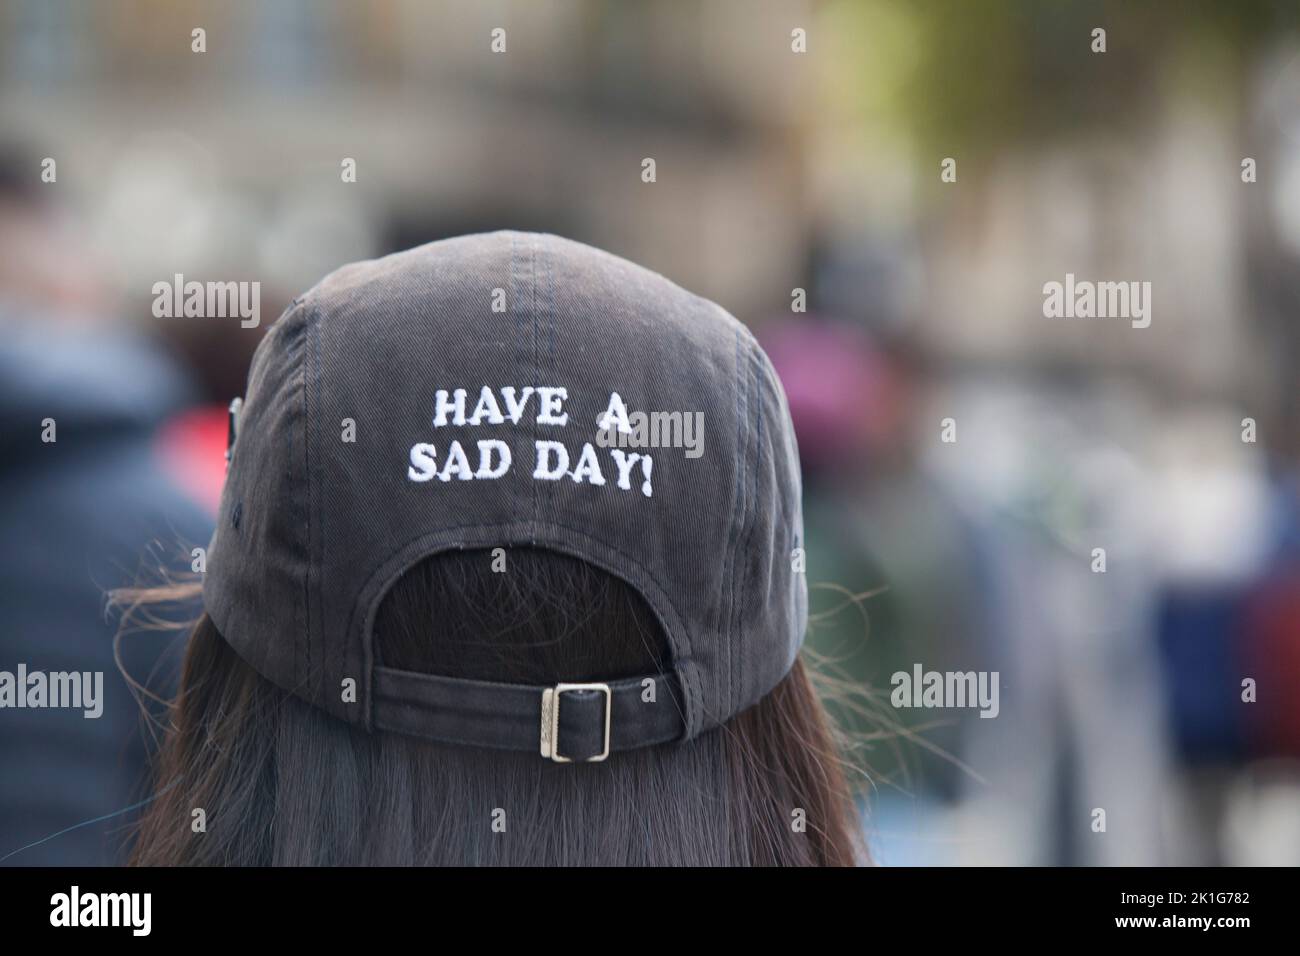 London, UK, 18 September 2022: Crowds are filling the streets of Whitehall to pay their respects to the late monarch Queen Elizabeth II, whose funeral takes place tomorrow. One woman wears a hat with the instruction 'Have a sad day!' which many people will tomorrow. Anna Watson/Alamy Live News Stock Photo